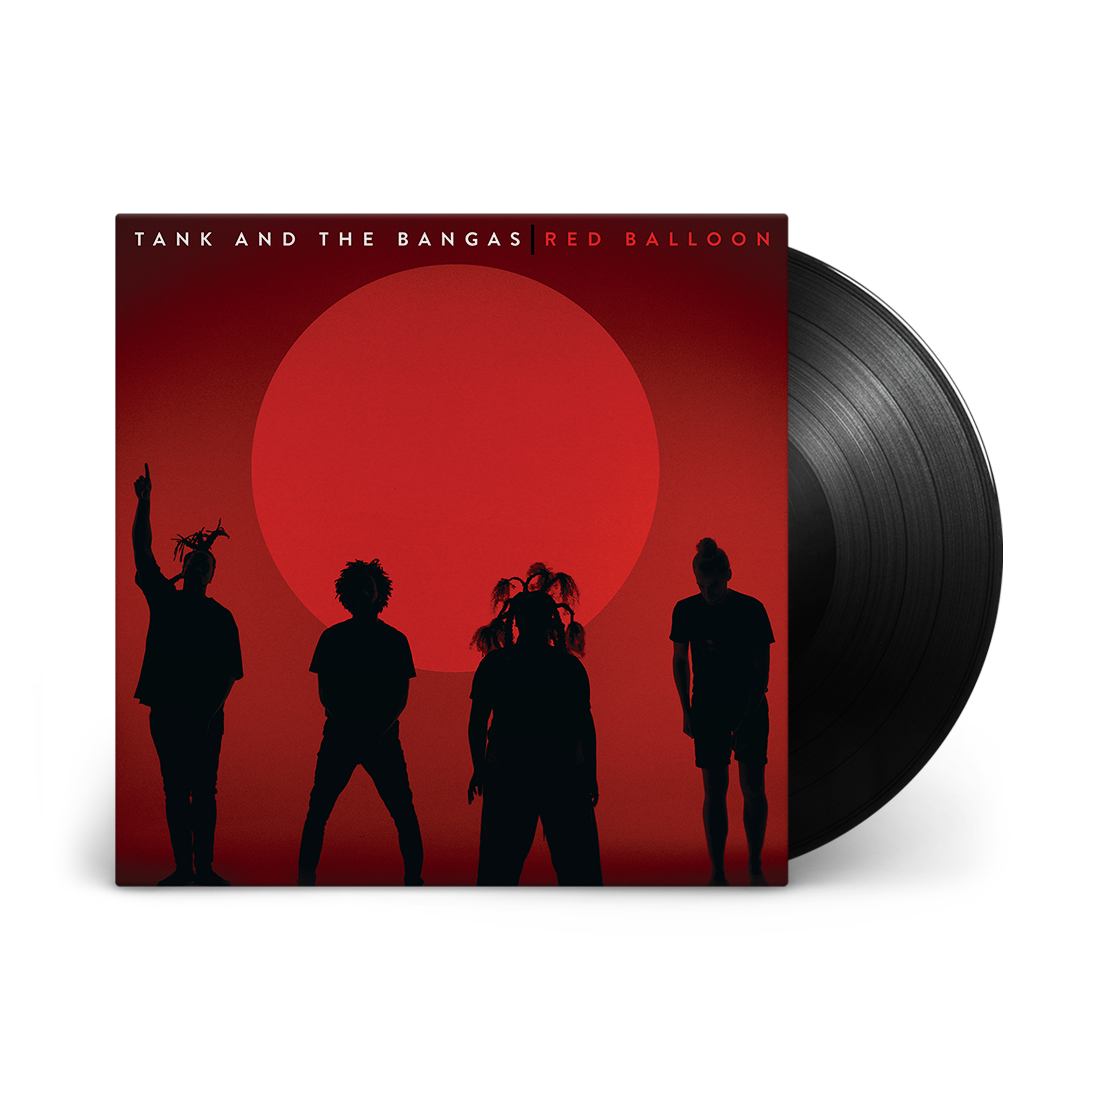 Tank And The Bangas - Red Balloon: Vinyl LP